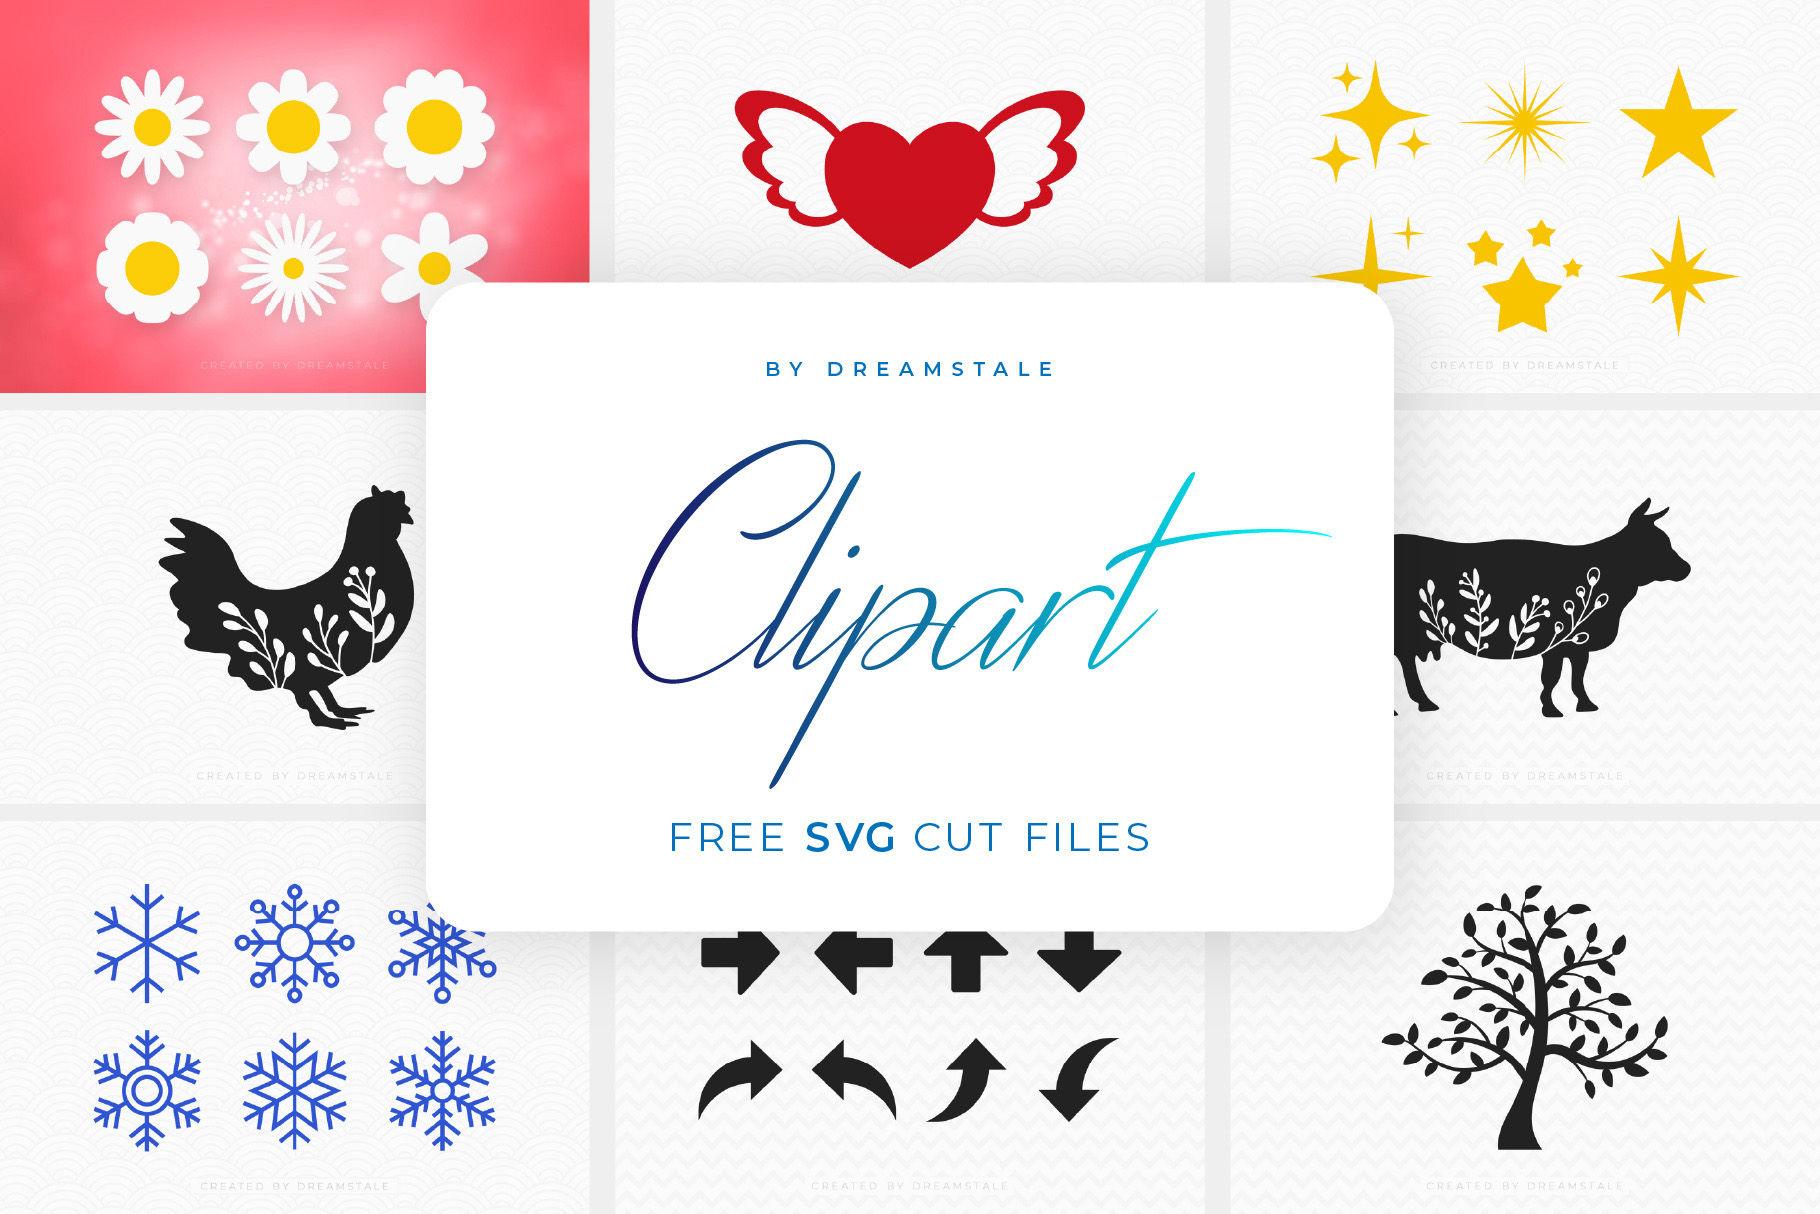 Download 10 Free SVG Files of the Month